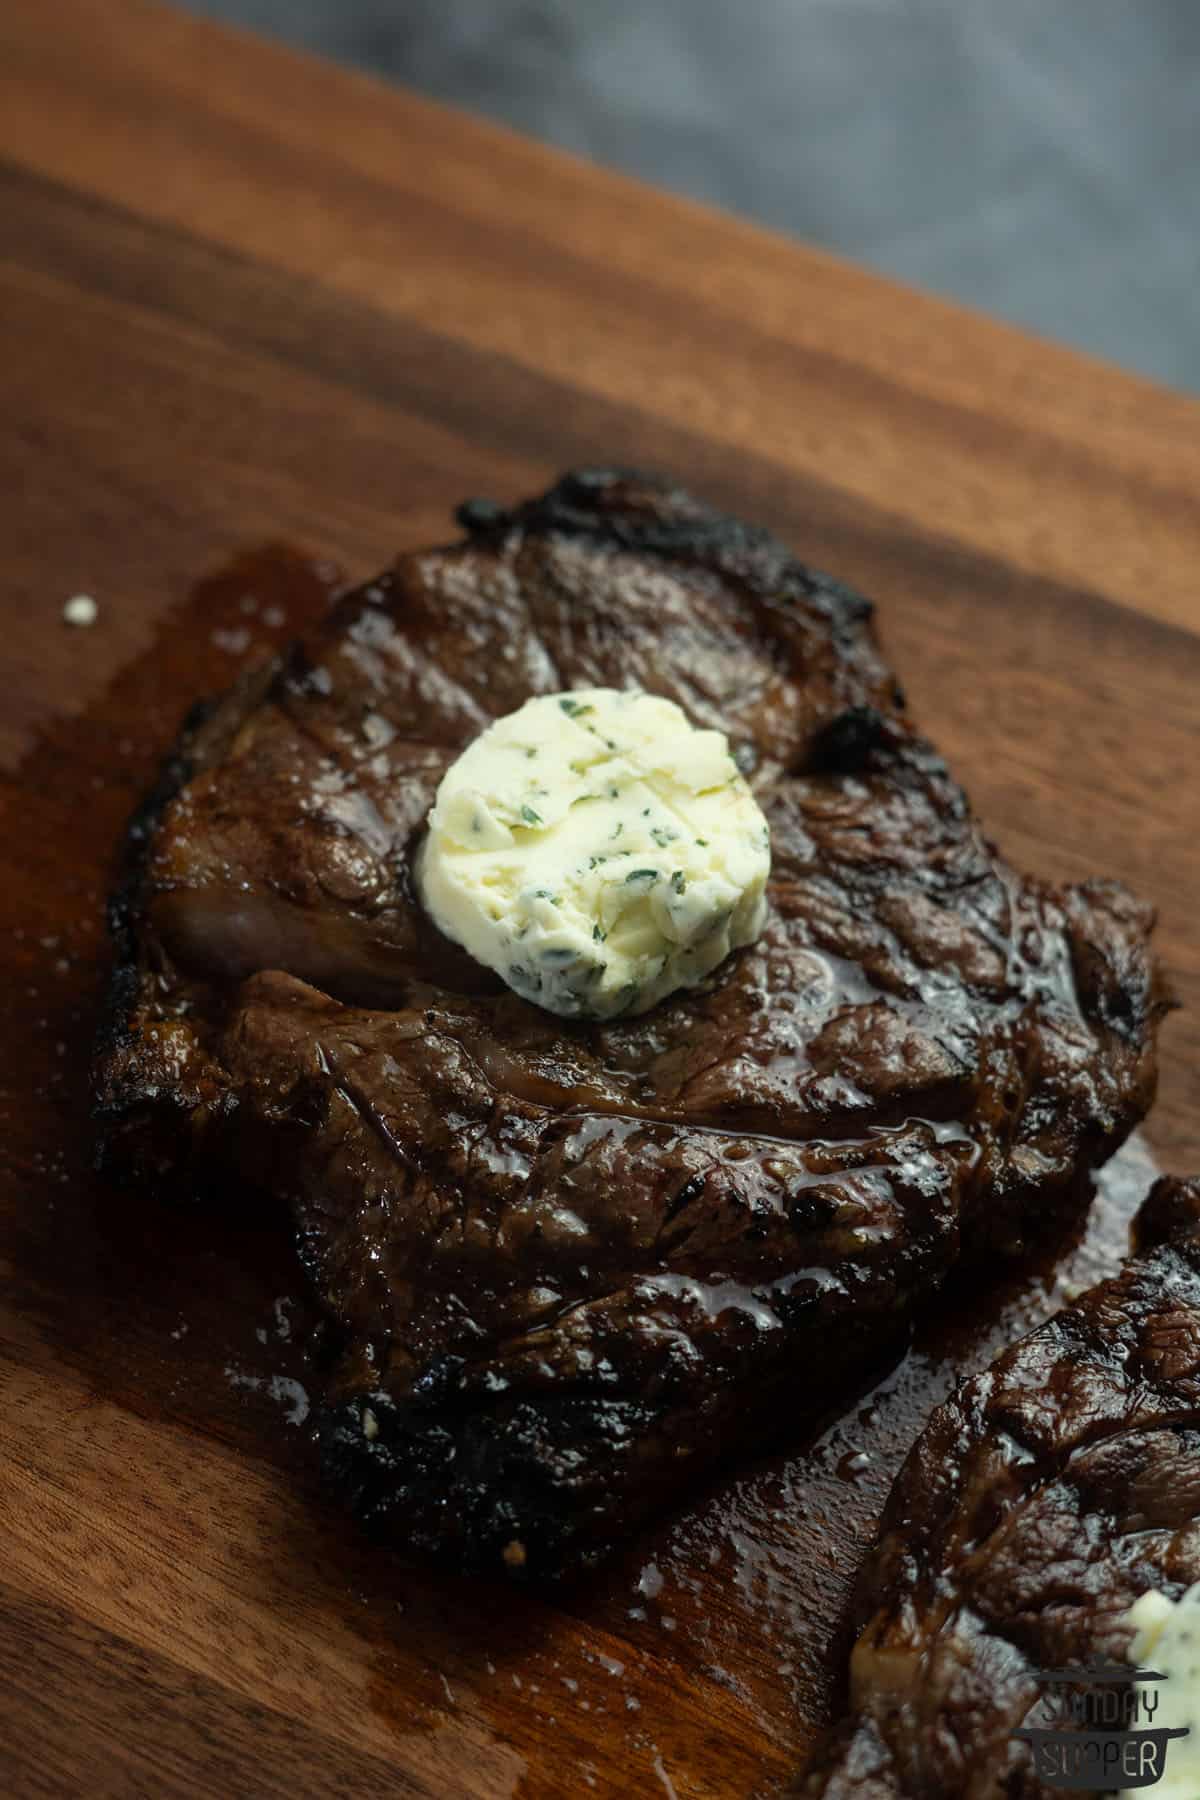 a slice of compound butter on a freshly cooked steak